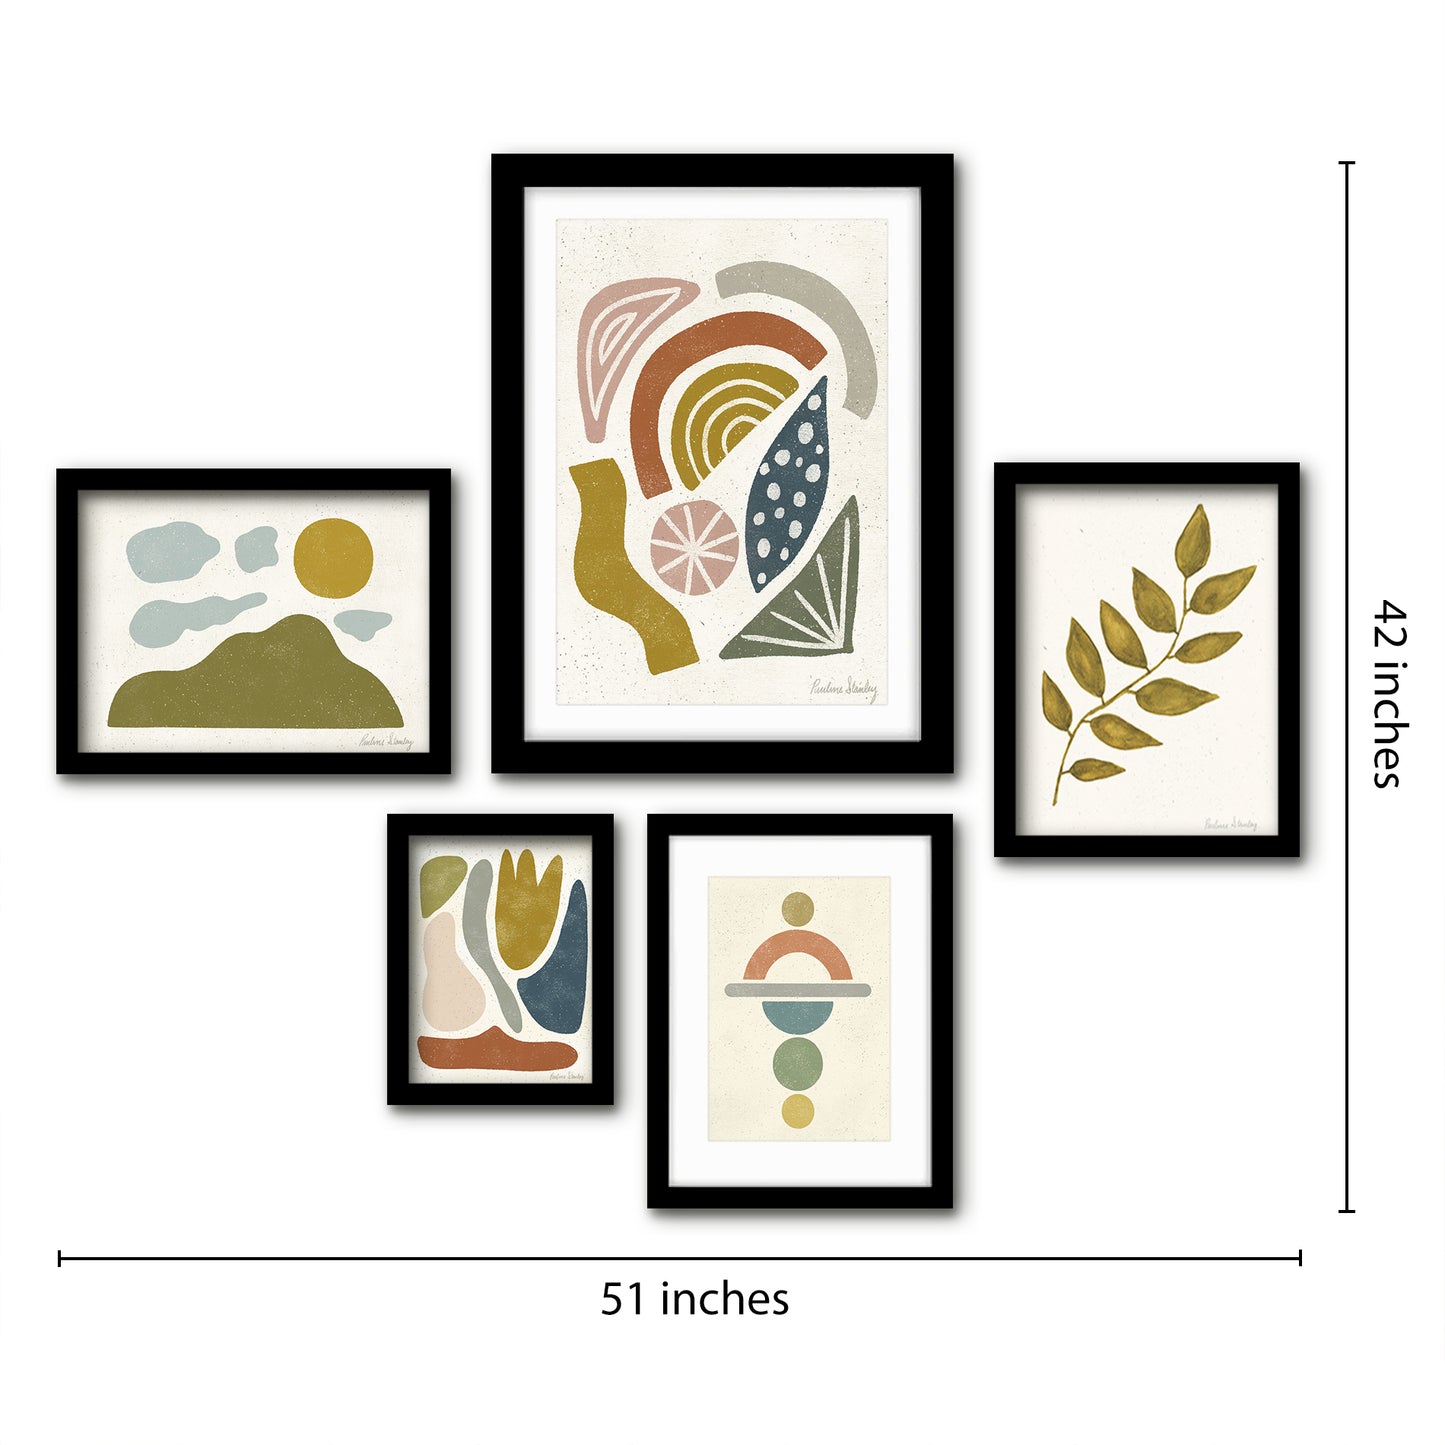 Americanflat 5 Piece Black Framed Gallery Wall Art Set - Colorful Shapes Green Organic Nature